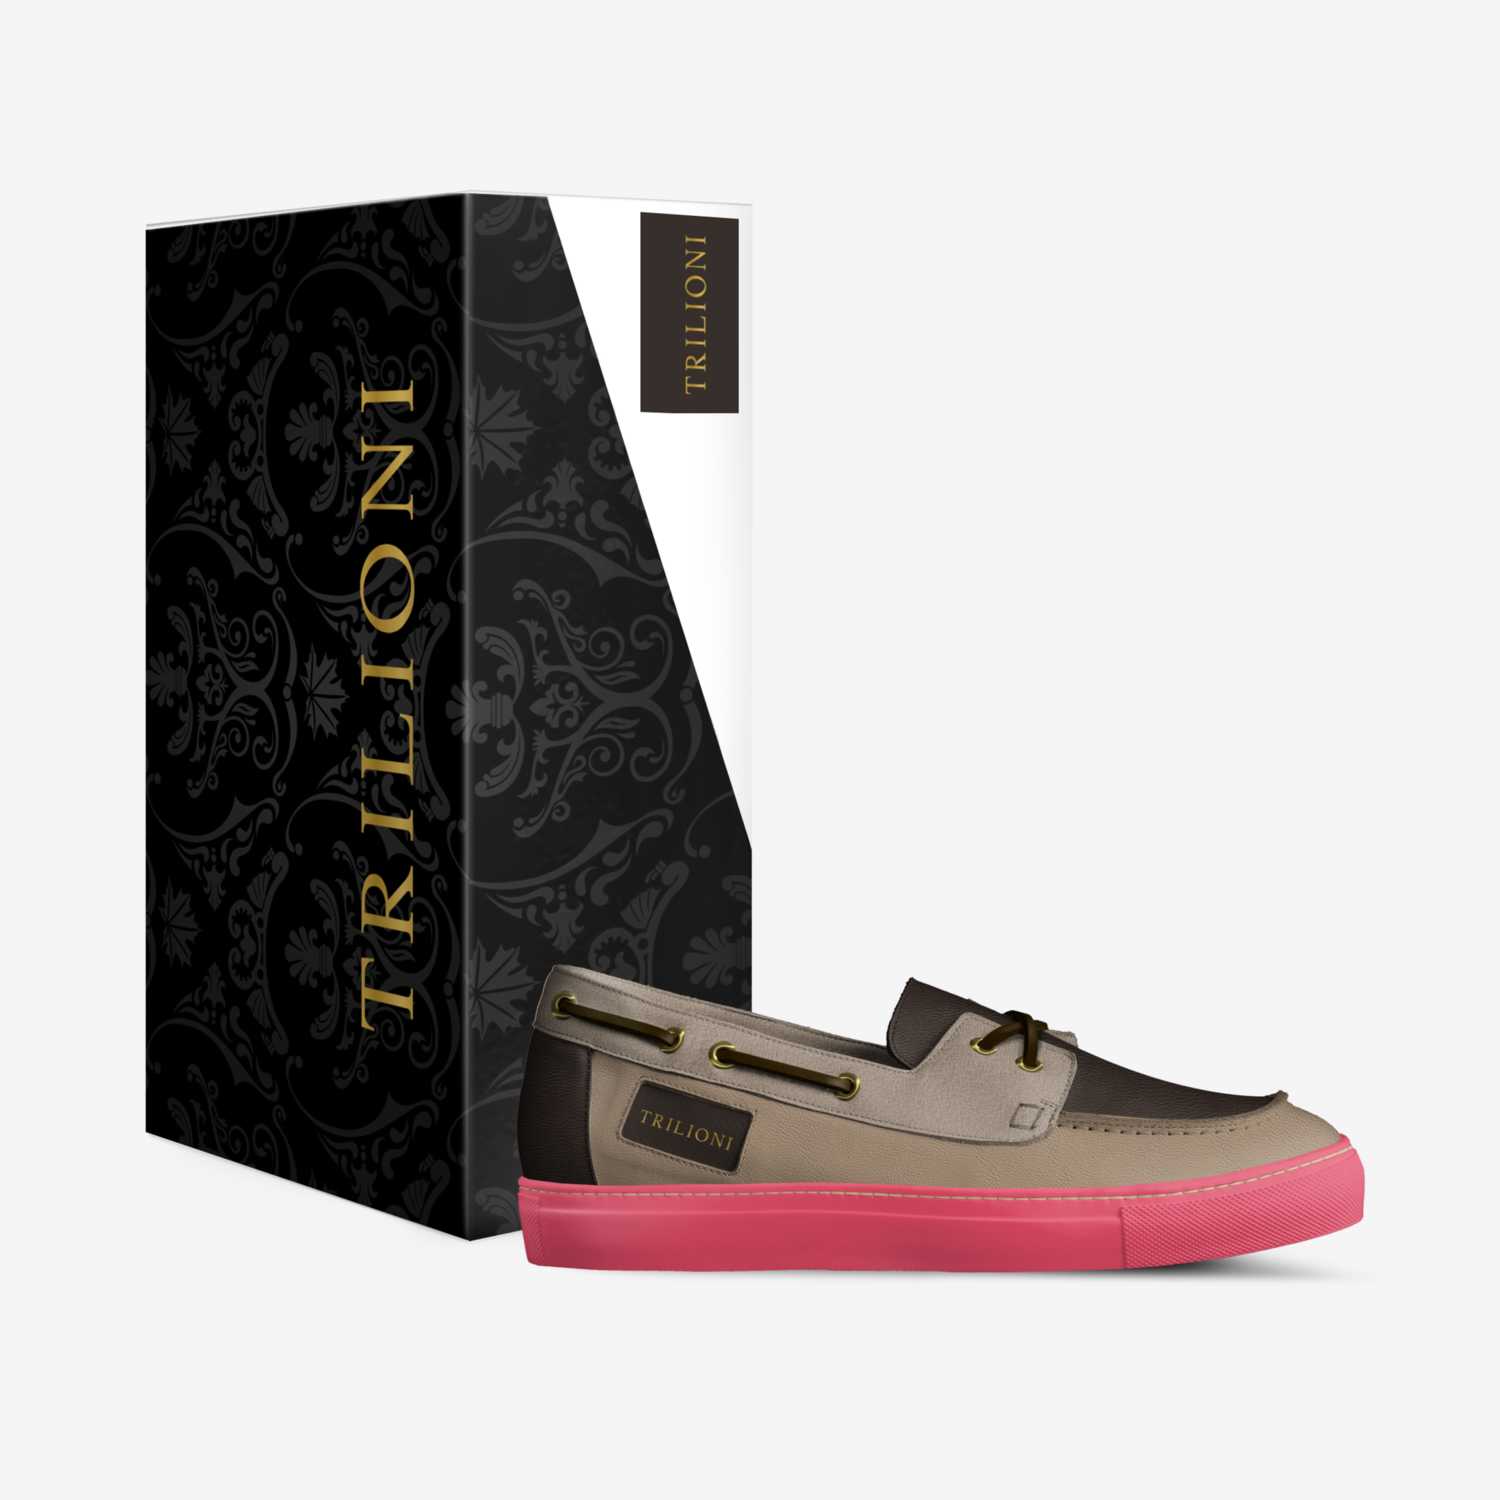 TRILIONI "Candy"  custom made in Italy shoes by Jay Frye | Box view